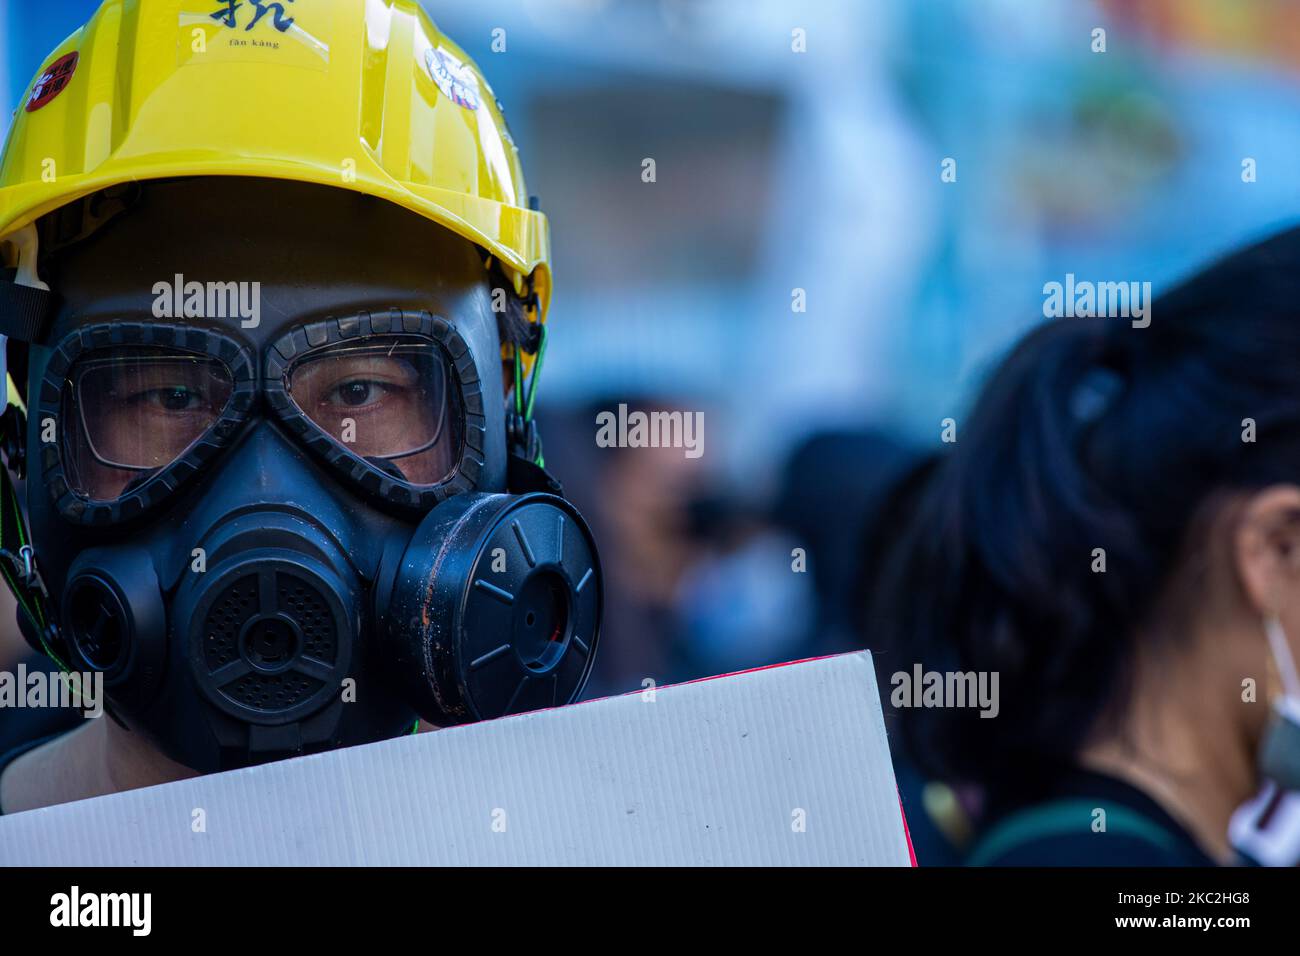 A protester wears gas mask during the march to demand the release of 12 Hong Kong detainees in Taipei, Taiwan, on October 25, 2020. Hundreds marched in Taiwan's capital on Sunday to demand the release of 12 Hong Kong anti-government protesters who were allegedly traveling illegally by boat to Taiwan when Chinese authorities captured and detained them in August. (Photo by Annabelle Chih/NurPhoto) Stock Photo